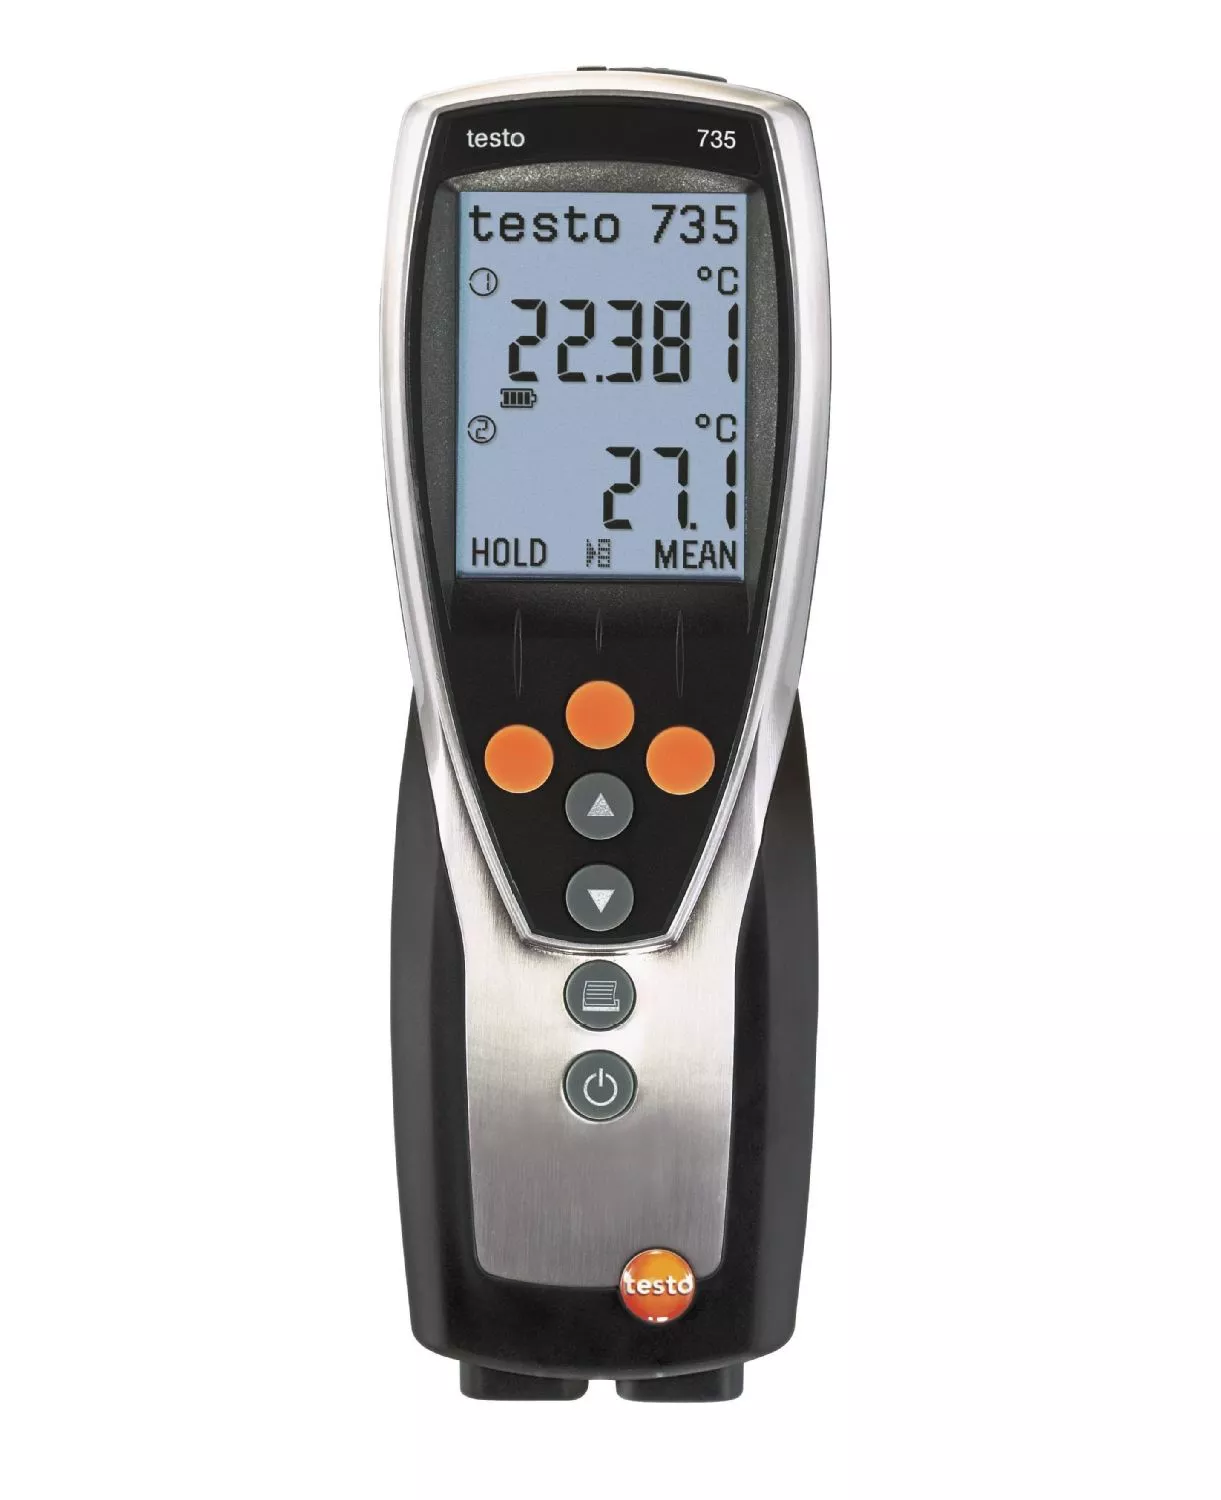 In Stock Testo 735-2 - Multichannel thermometer Order-Nr.  0563 7352  New & Original With very Competitive price